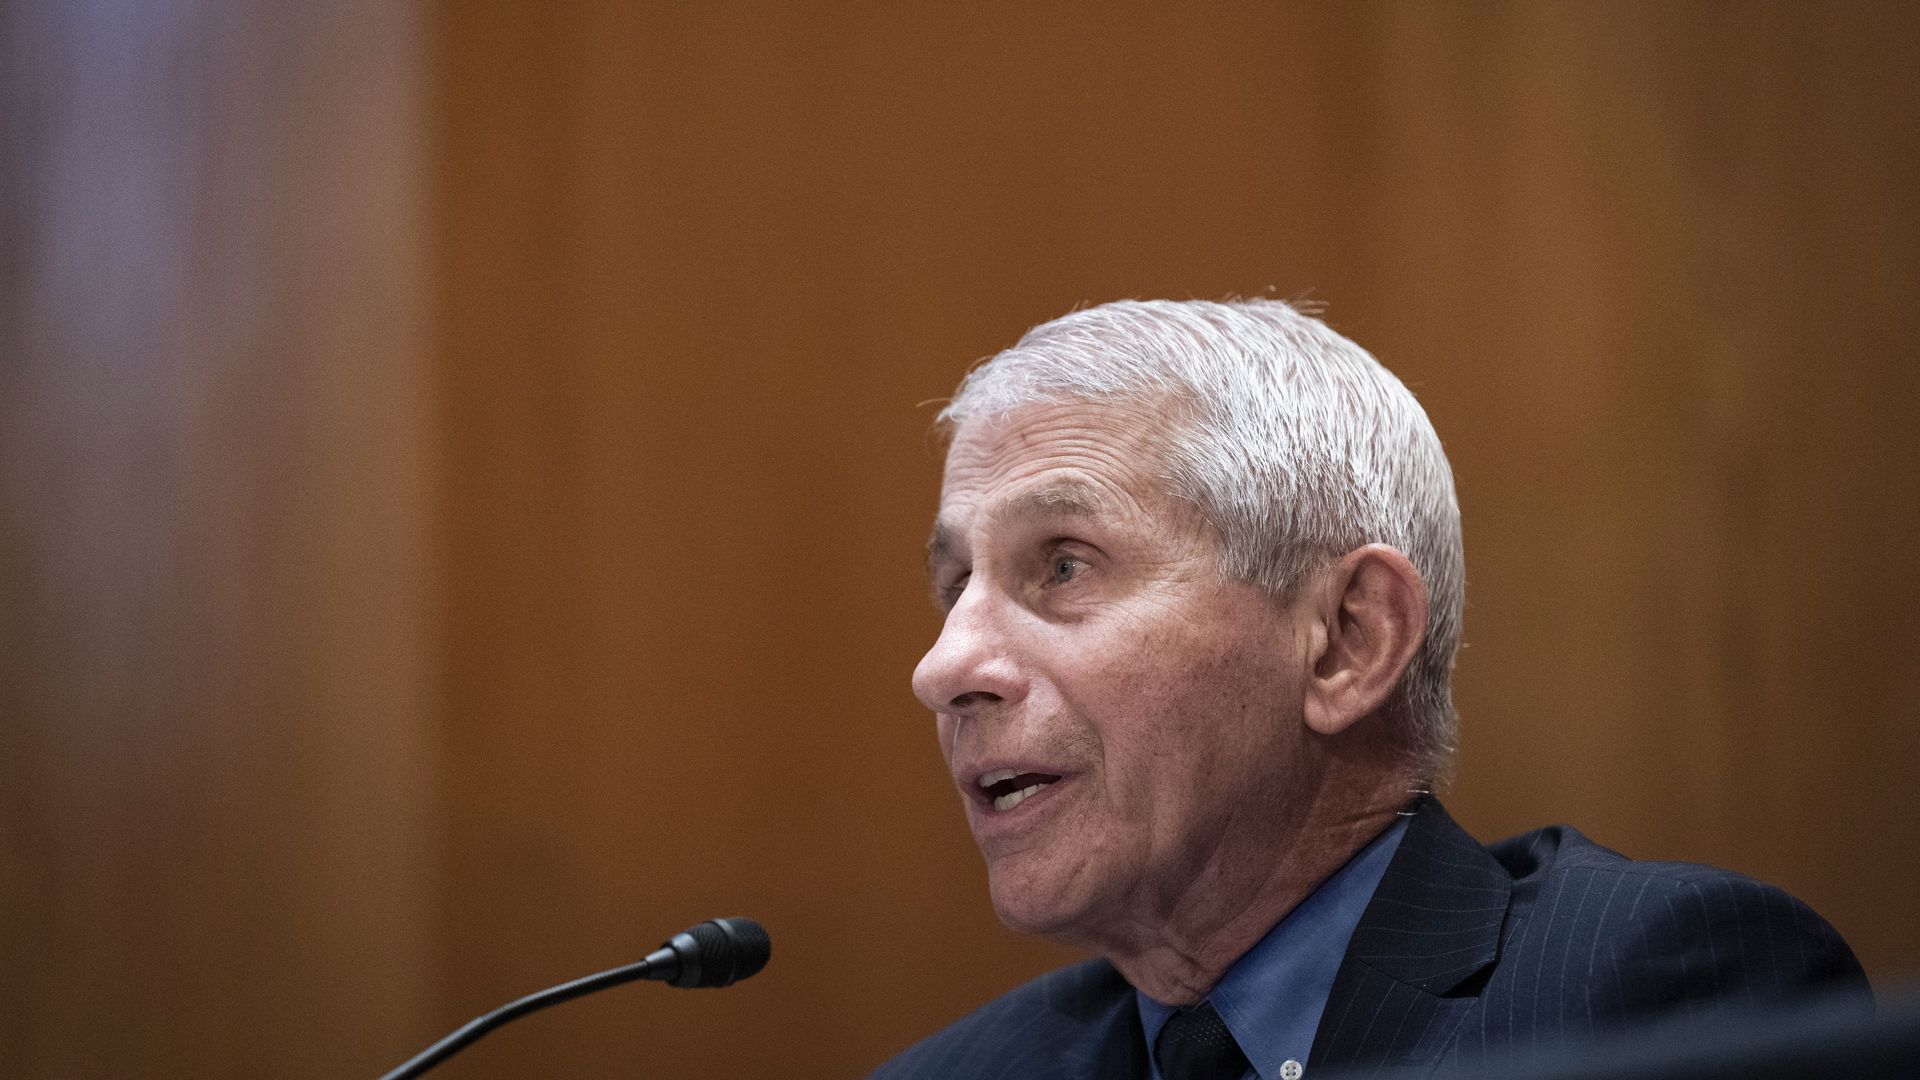 Anthony Fauci speaks during a Senate Appropriations Subcommittee hearing in Washington, D.C., U.S., on Wednesday, May 26, 2021. 